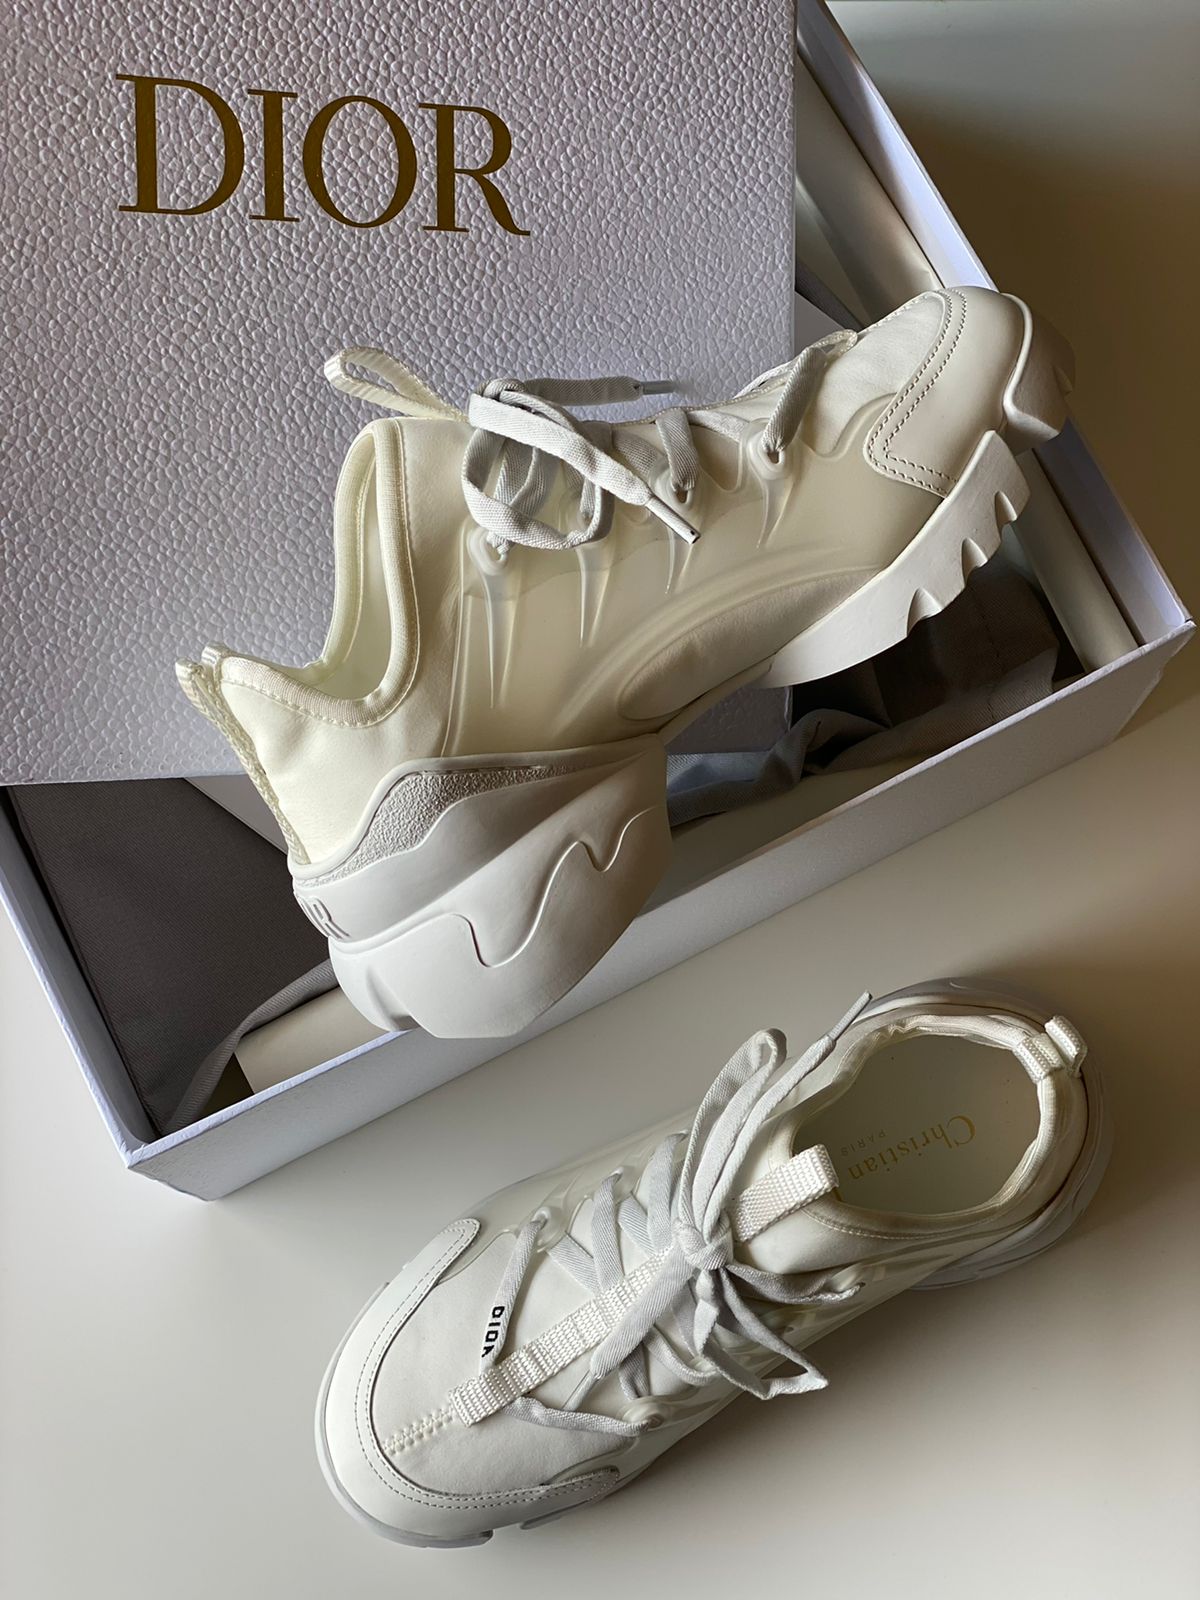 Dior Style #4 Shoes